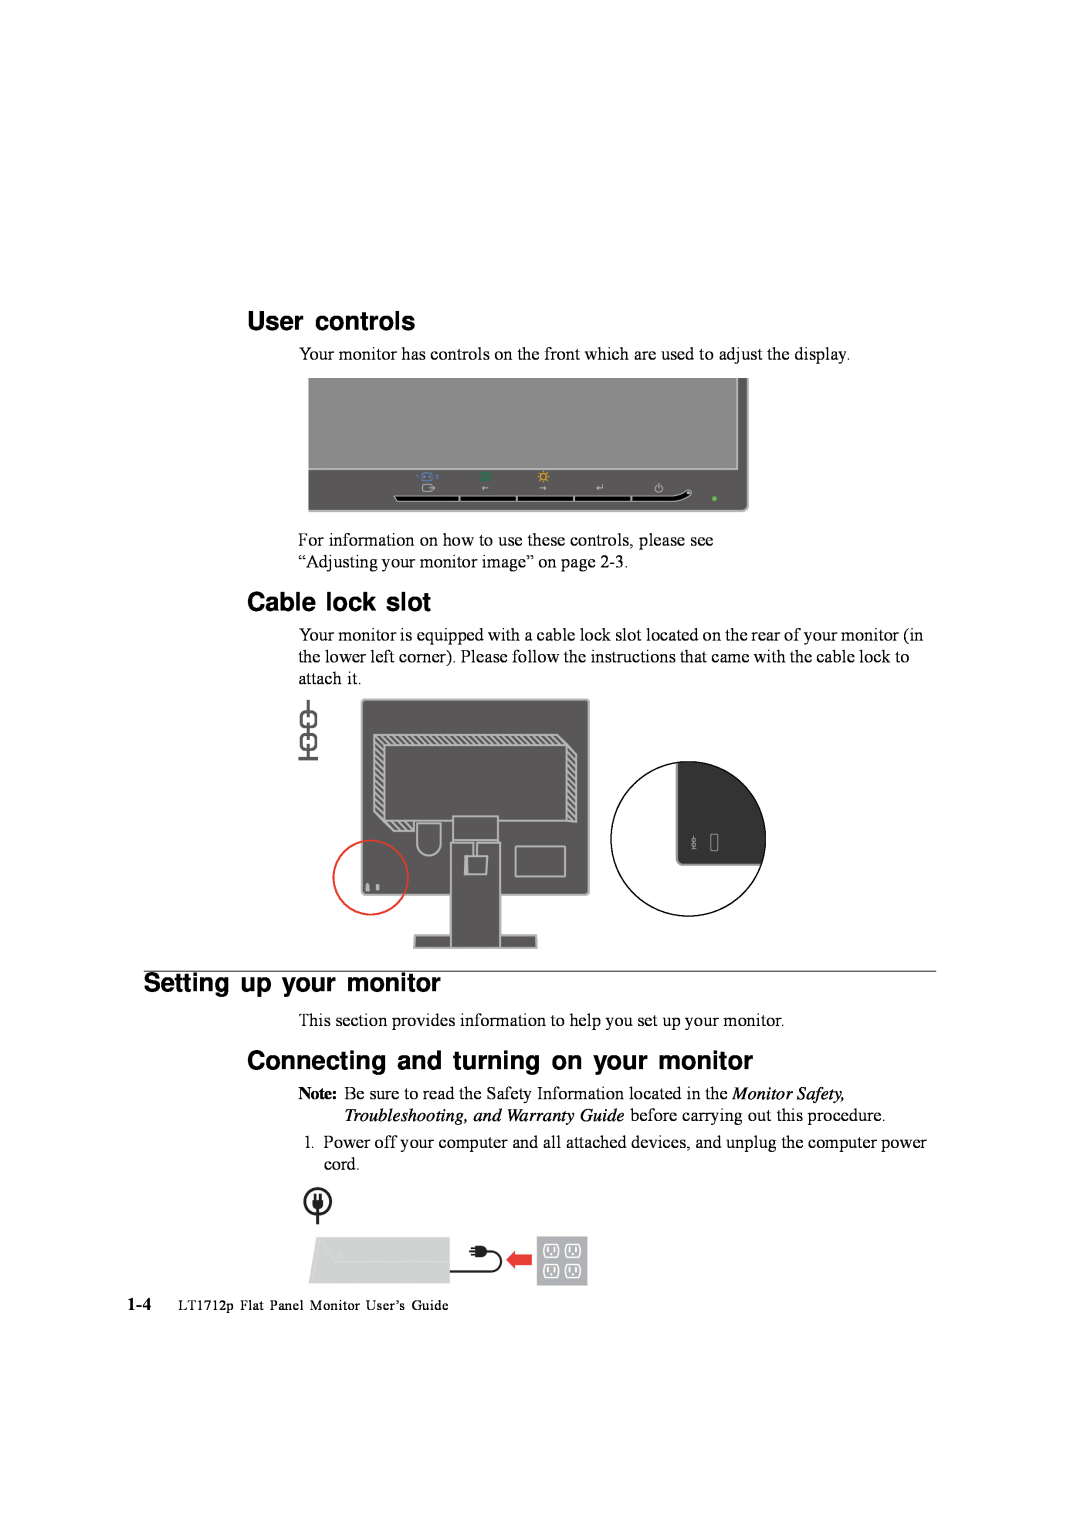 Lenovo 5047HC2 manual User controls, Cable lock slot, Setting up your monitor, Connecting and turning on your monitor 